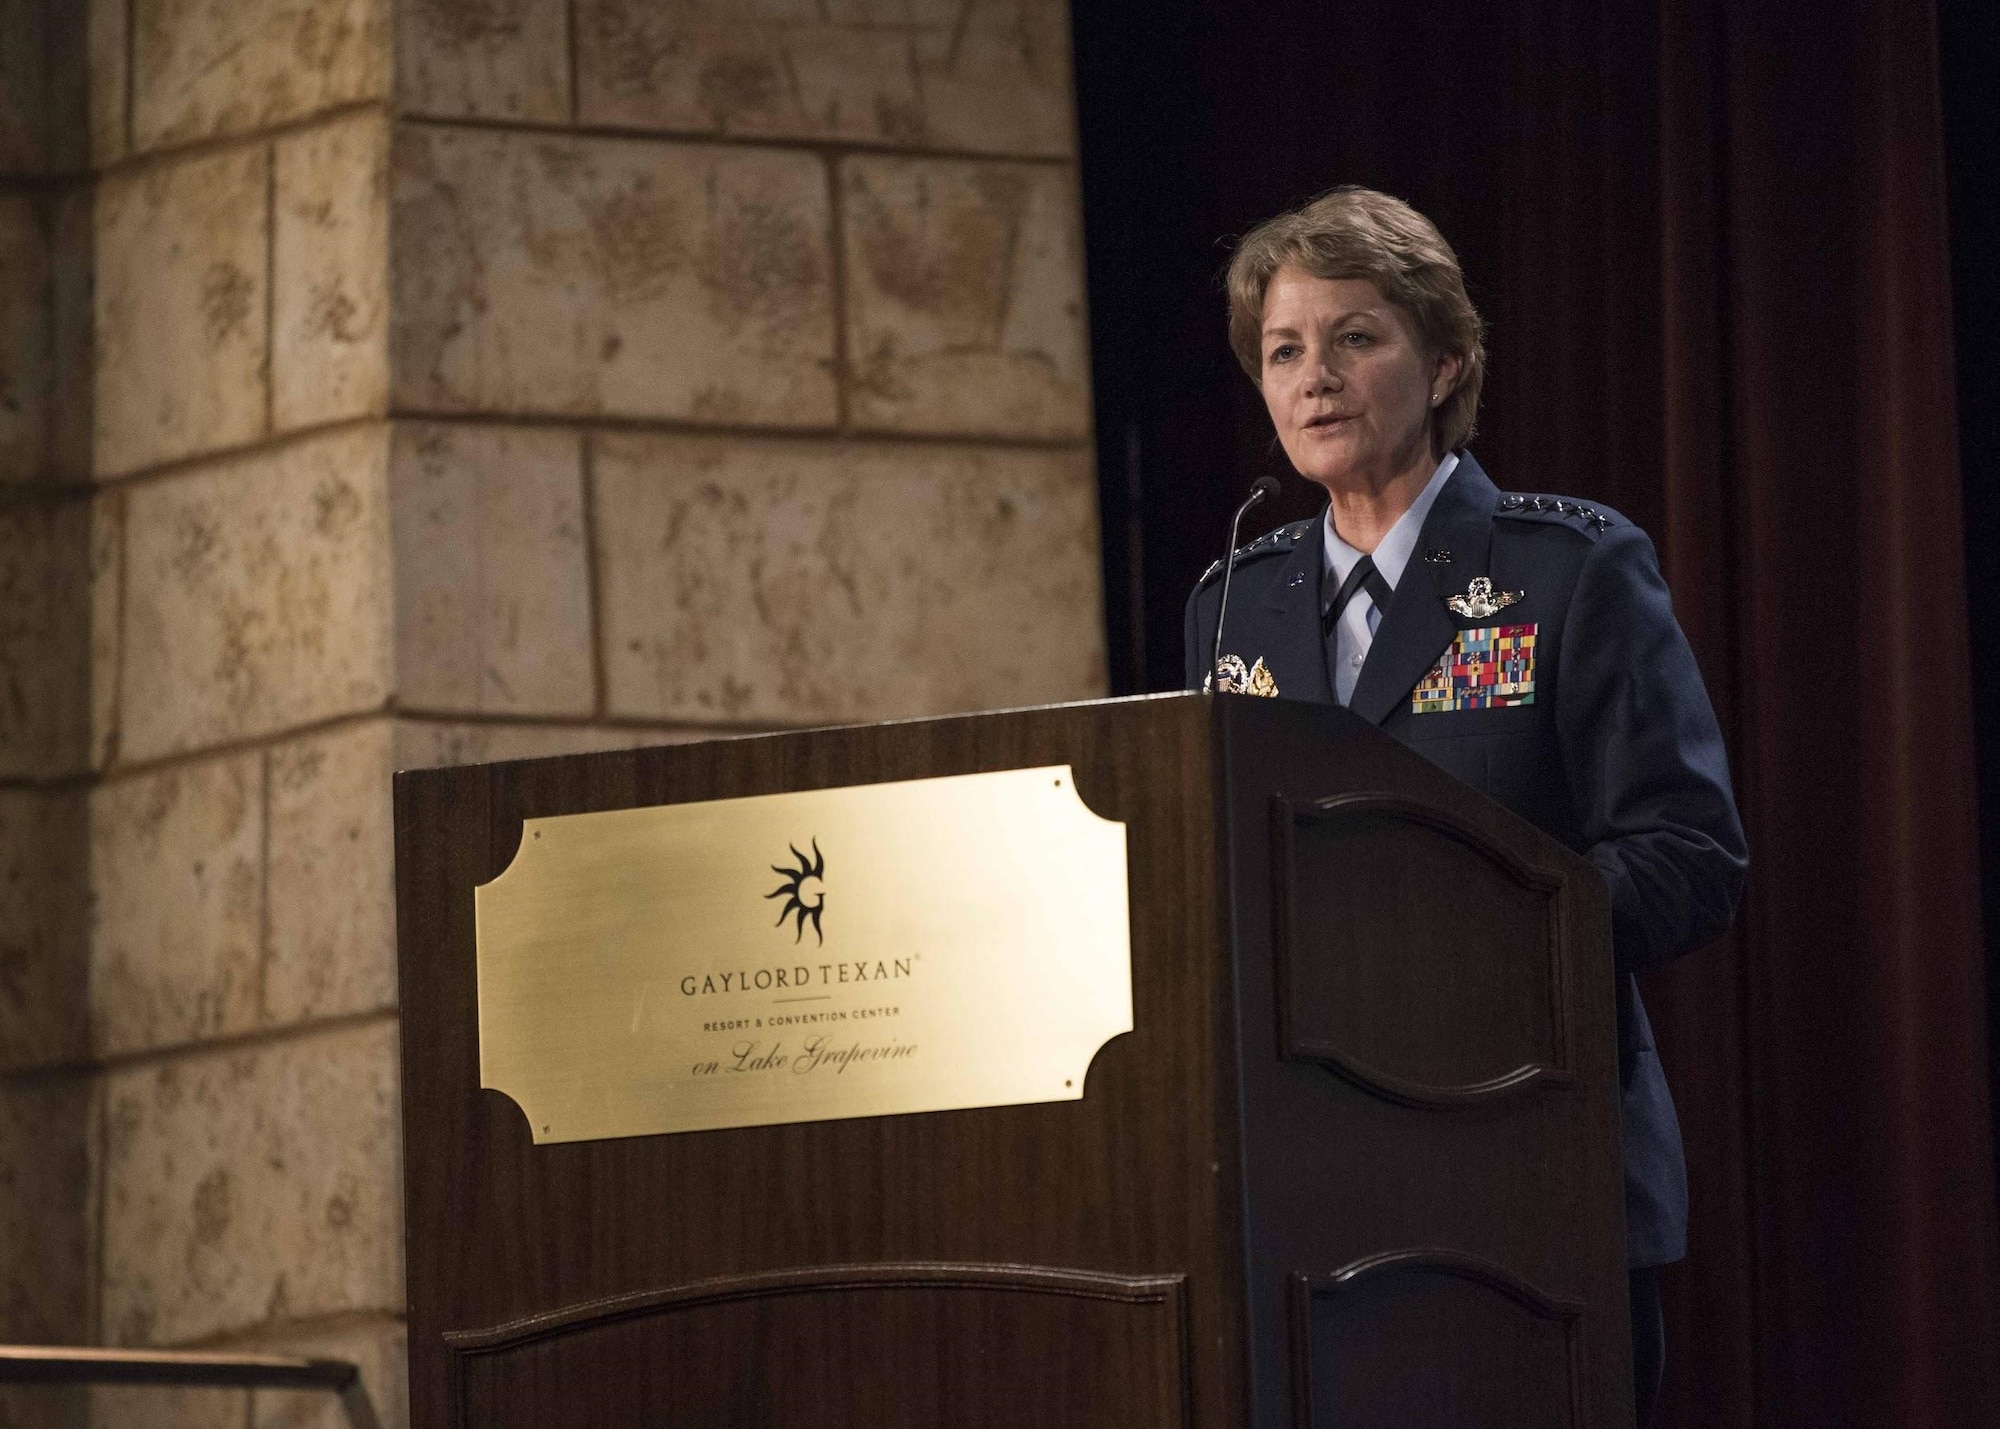 Gen. Maryanne Miller, Air Mobility Command commander, introduces the Secretary of the Air Force Heather Wilson at the Airlift/Tanker Association Symposium in Grapevine, Texas, Oct. 25, 2018. A/TA provides mobility Airmen a professional development forum to  engage with industry experts within the mobility enterprise, attend seminars focused on mobility priorities, and listen to leadership perspectives from top leaders in the Air Force and Department of Defense.     (U.S. Air Force photo by Tech. Sgt. Jodi Martinez)